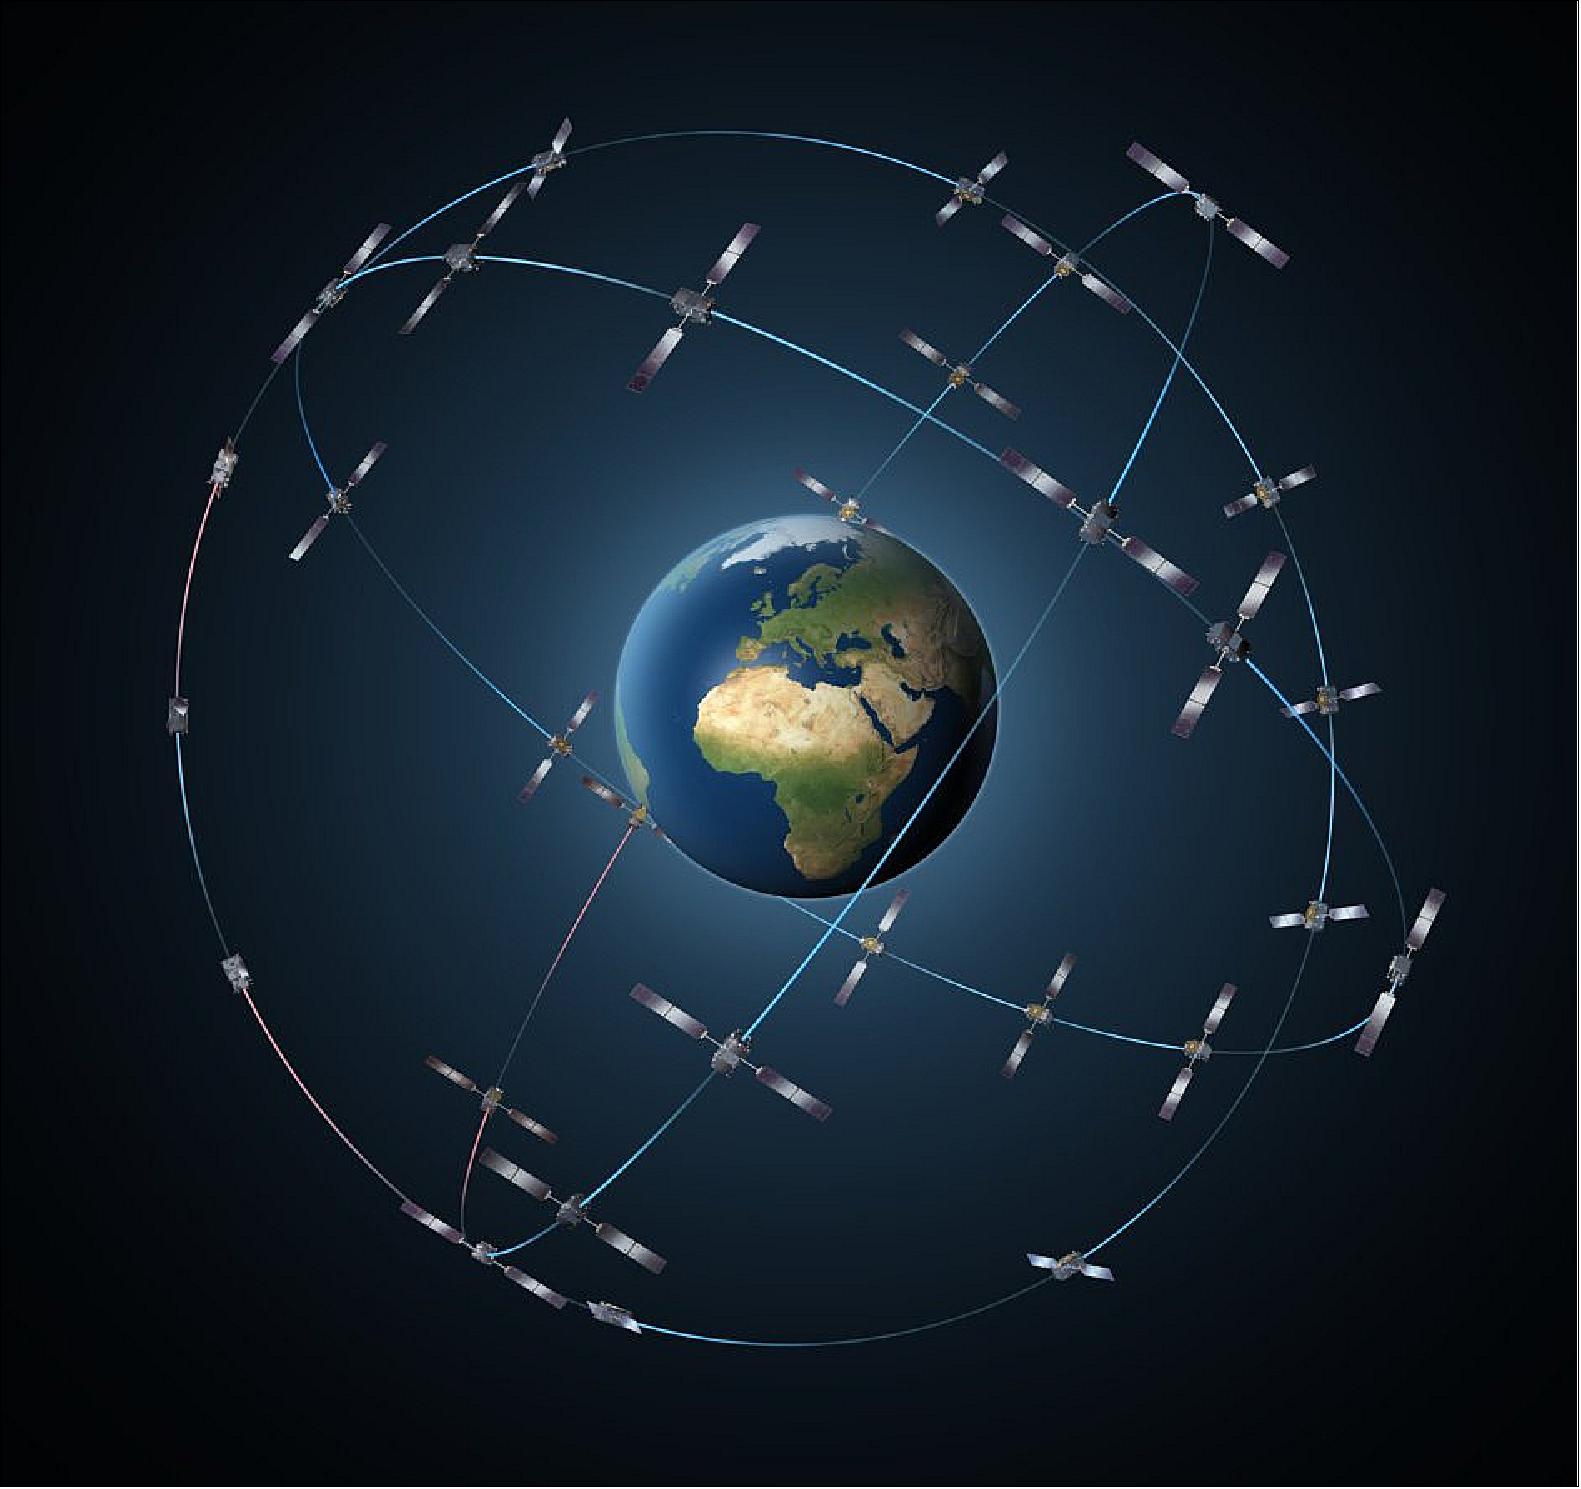 Figure 82: The complete Galileo constellation will consist of 24 satellites along three orbital planes, plus two spare satellites per orbit. The result will be Europe's largest-ever fleet, providing worldwide navigation coverage (image credit: ESA, P. Carril)